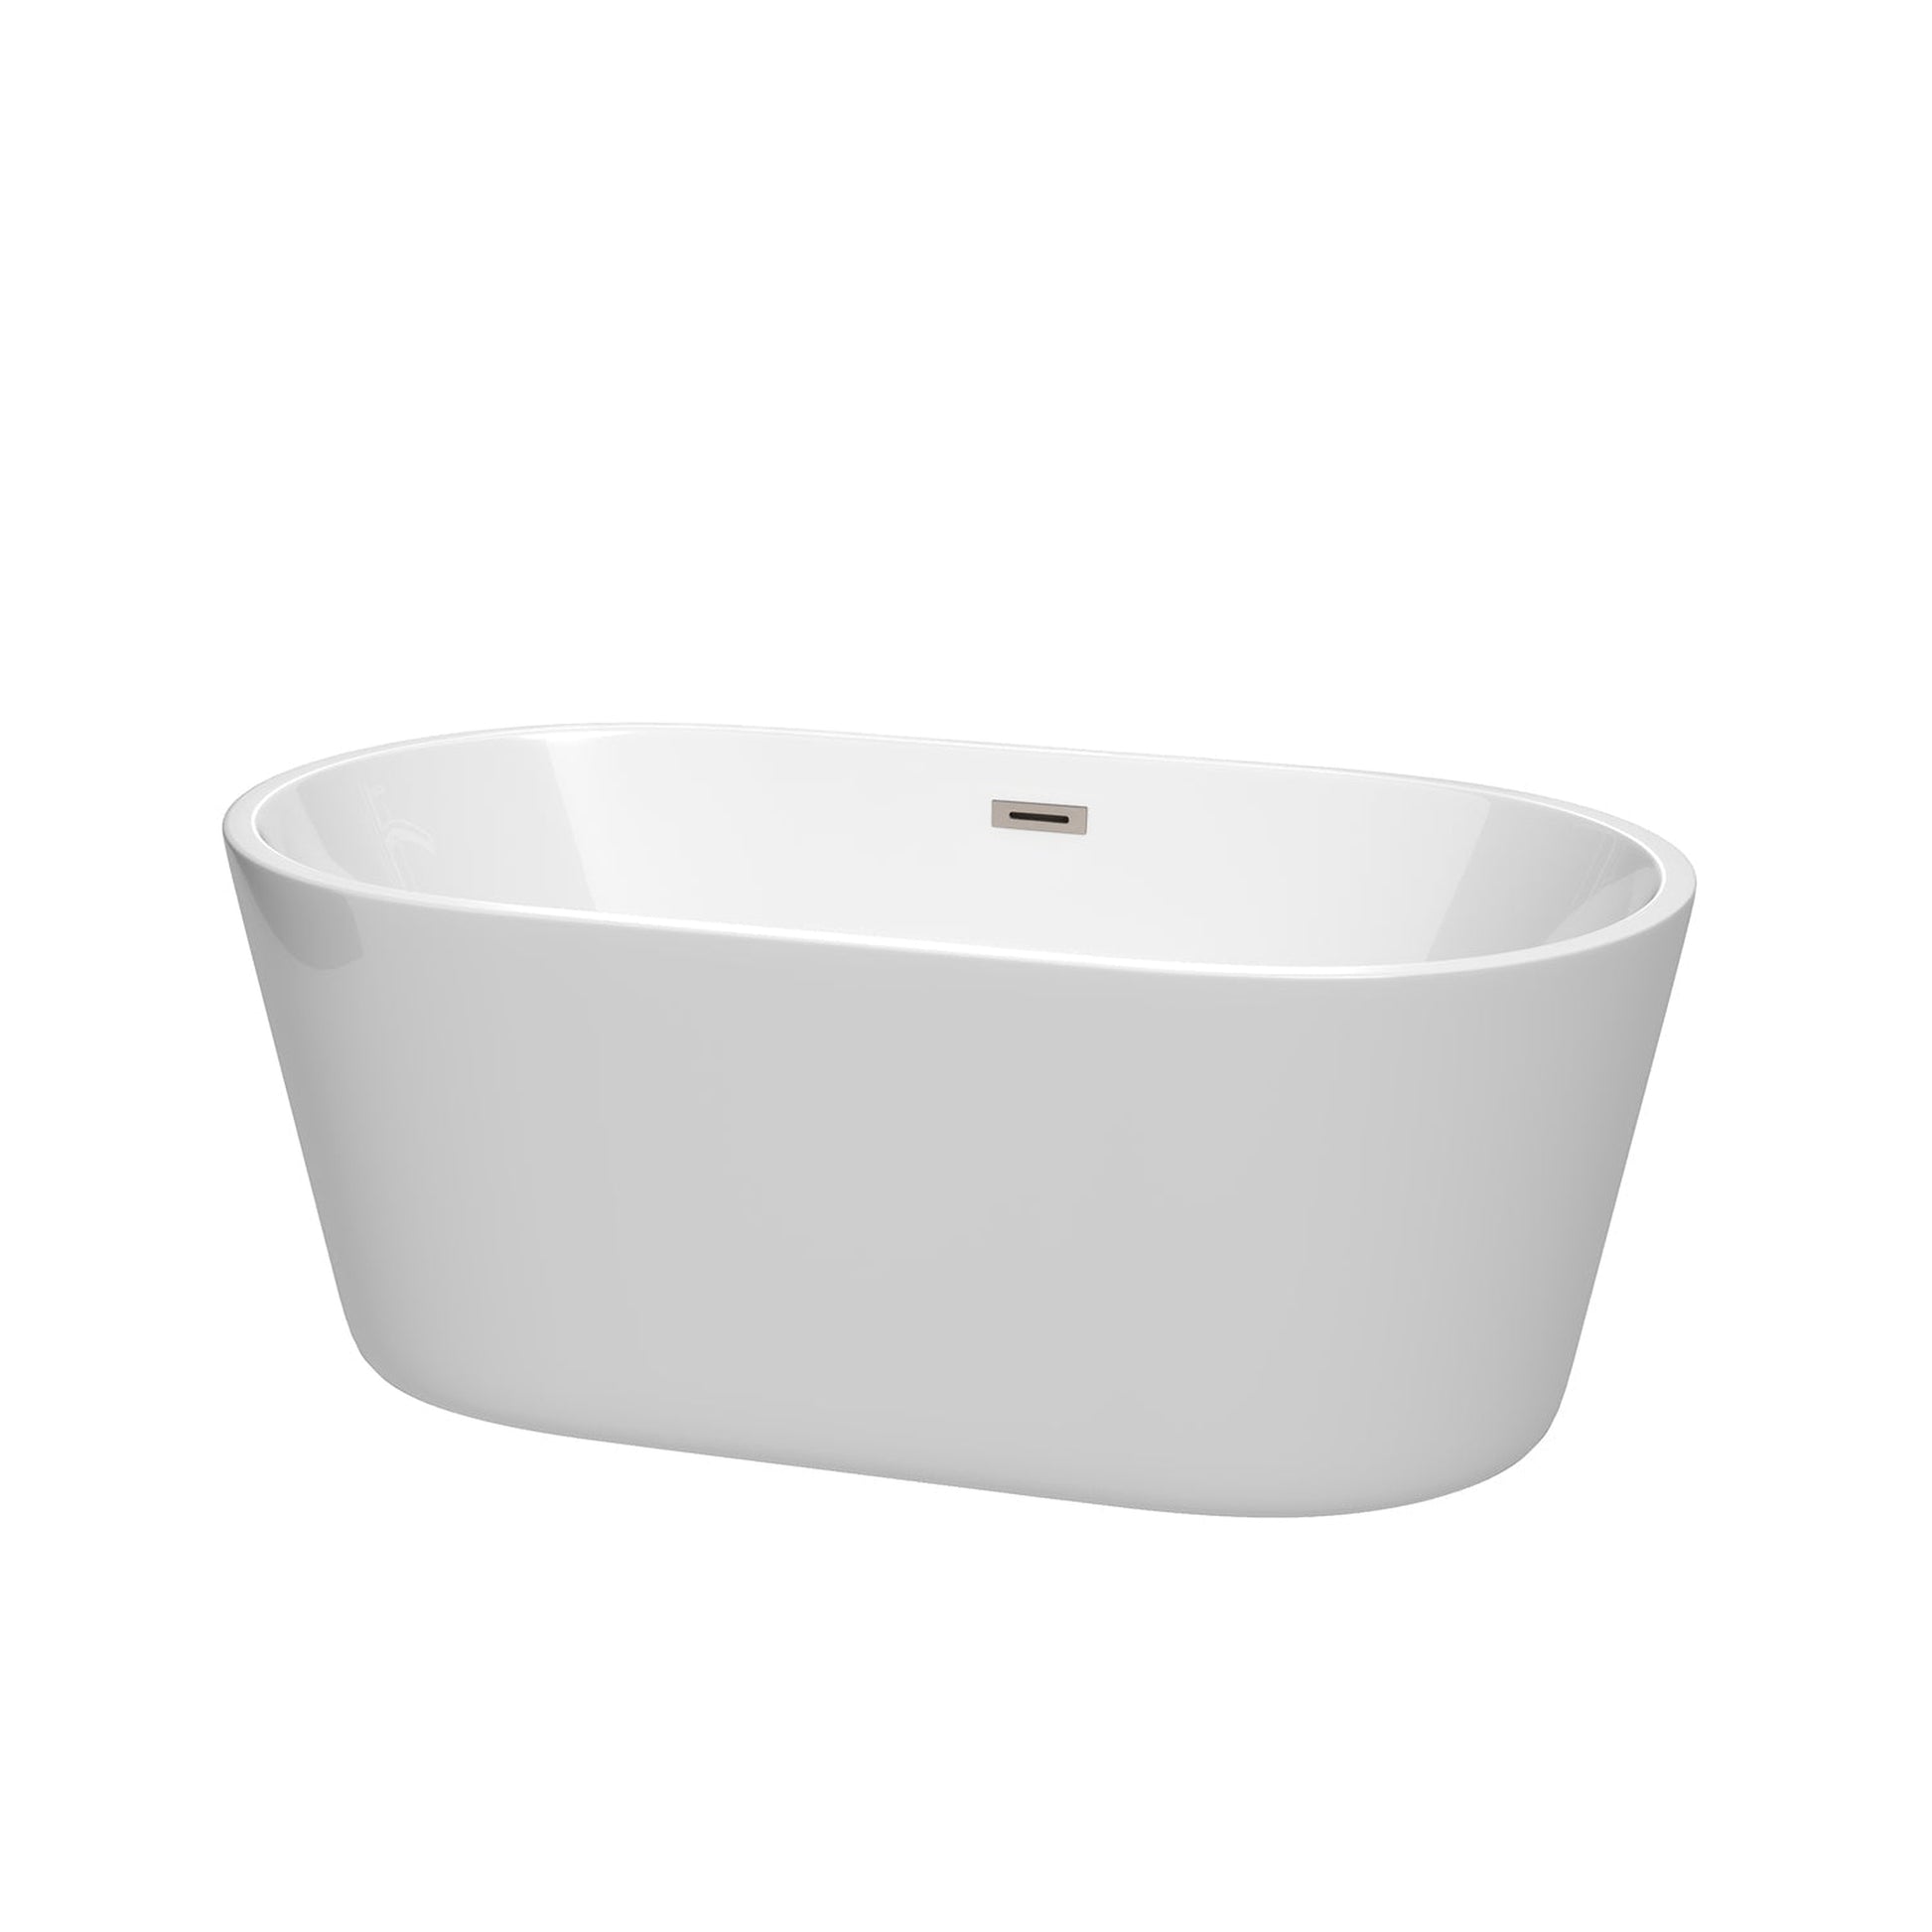 Wyndham Collection Carissa 60" Freestanding Bathtub in White With Brushed Nickel Drain and Overflow Trim